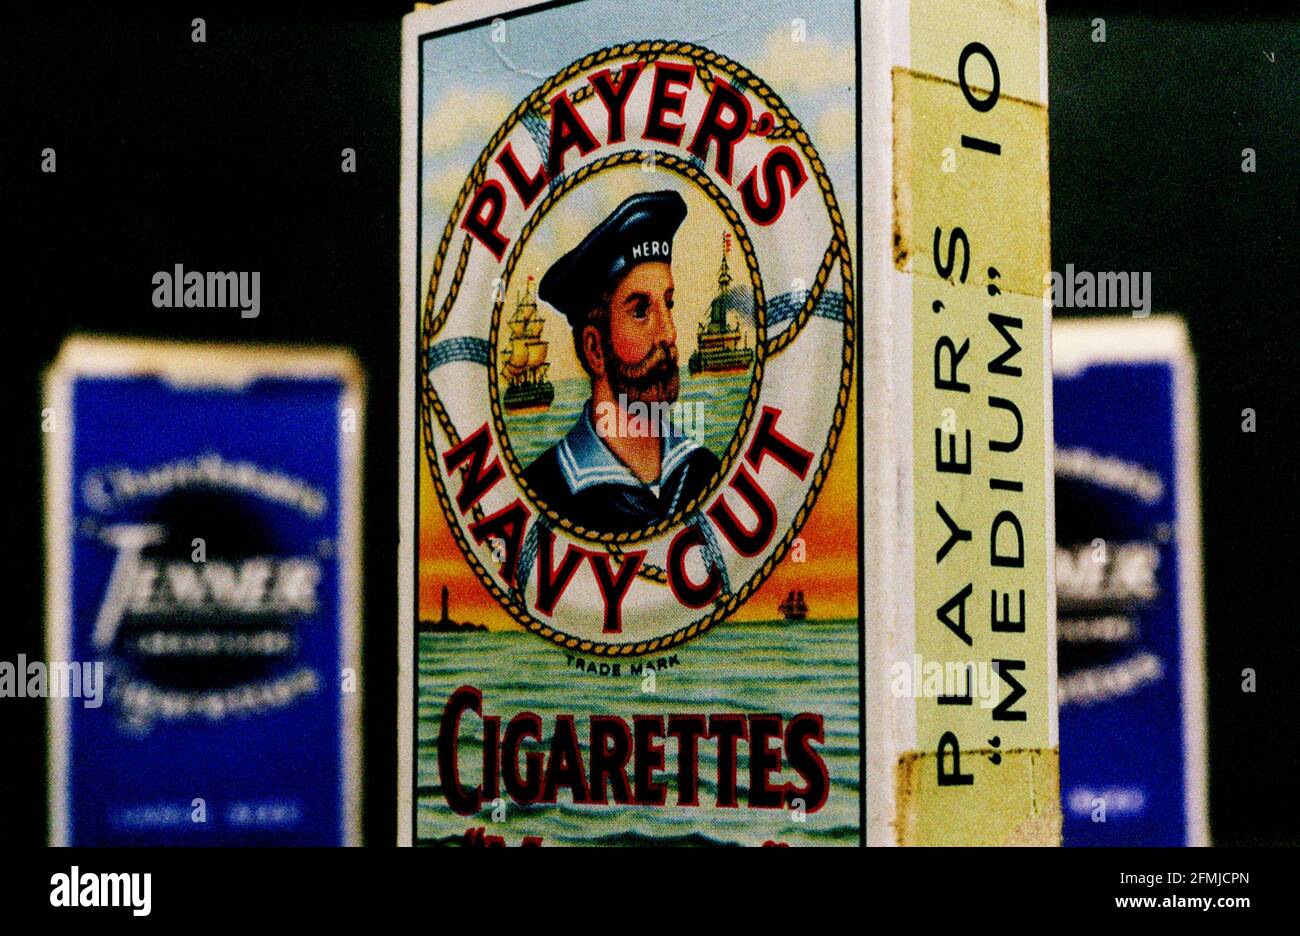 Packet of Players Cigarettes Stock Photo